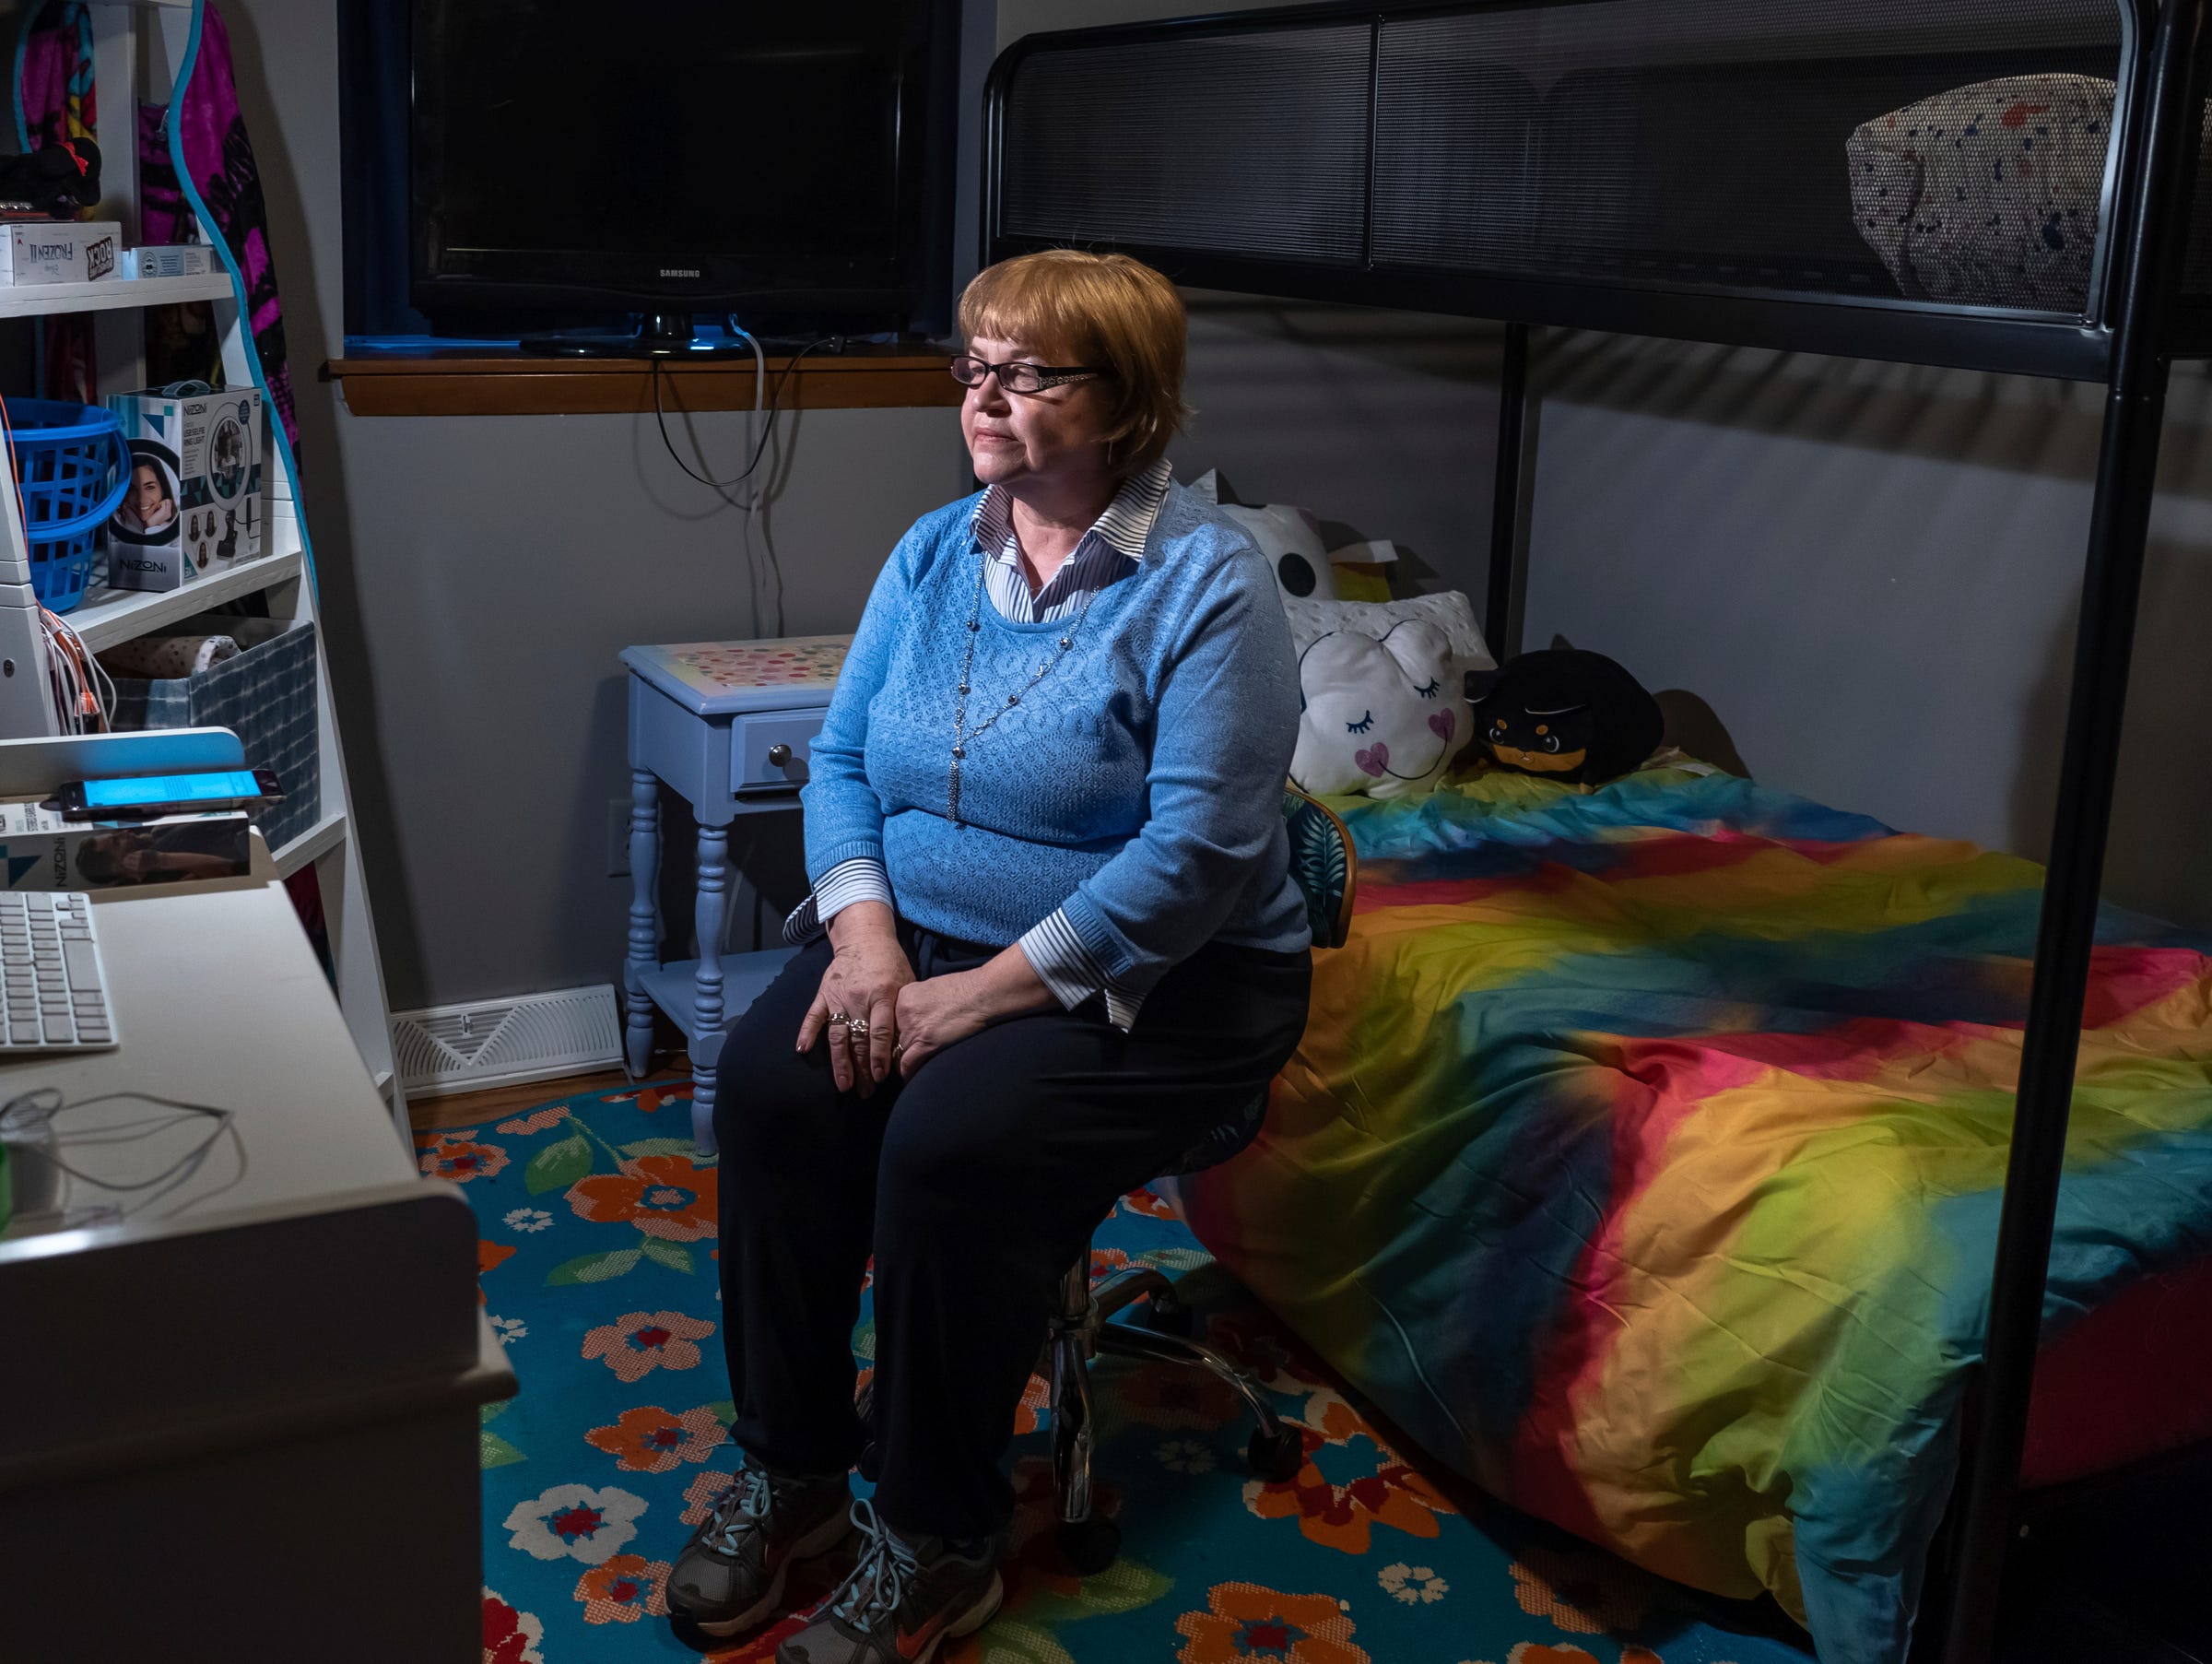 Kathy Reeder of Saginaw sits March 2 in a room she redecorated for her granddaughter in hopes of her return to Reeder's home with her two siblings.